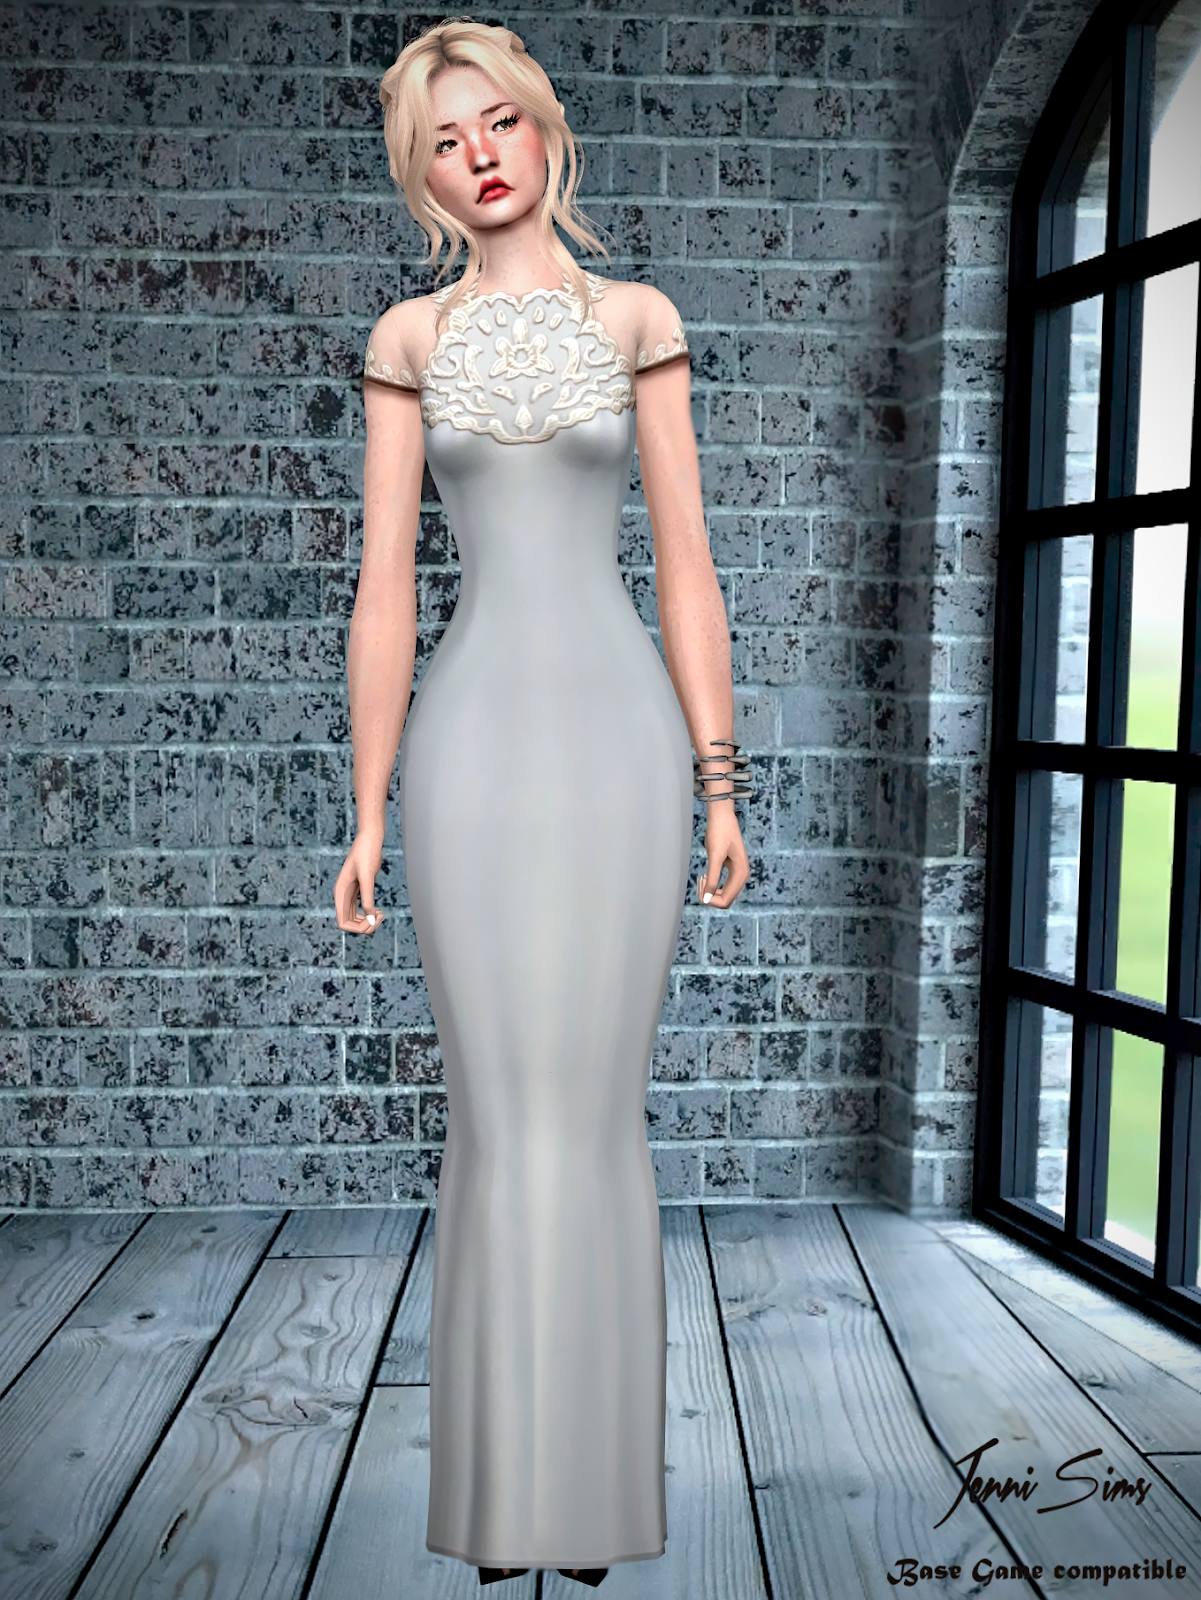 Downloads sims 4:Base Game compatible Evening Dress | JenniSims